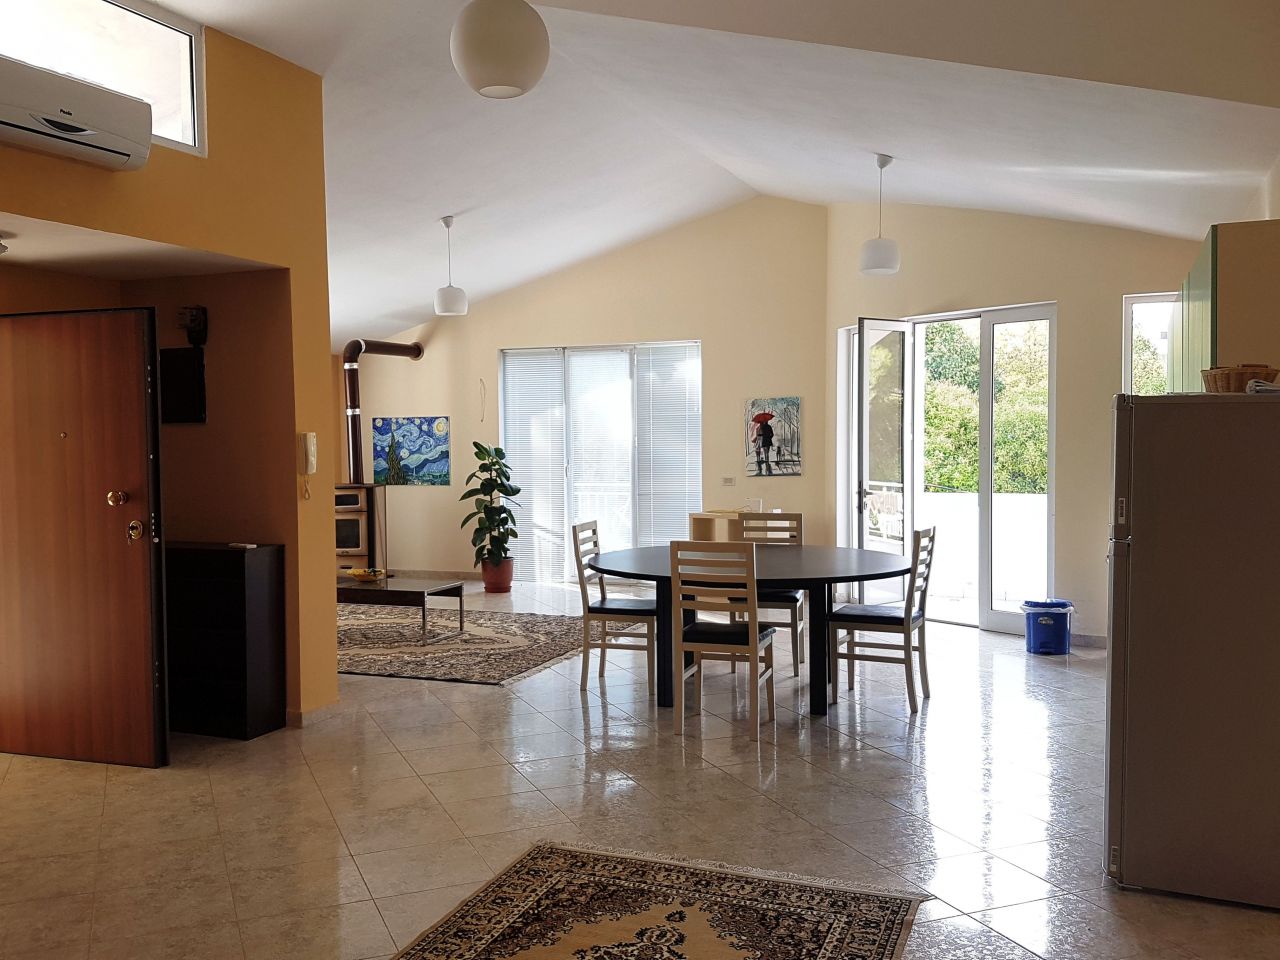 Albania Real Estate for Rent in Tirana. Spacious Apartment for Rent